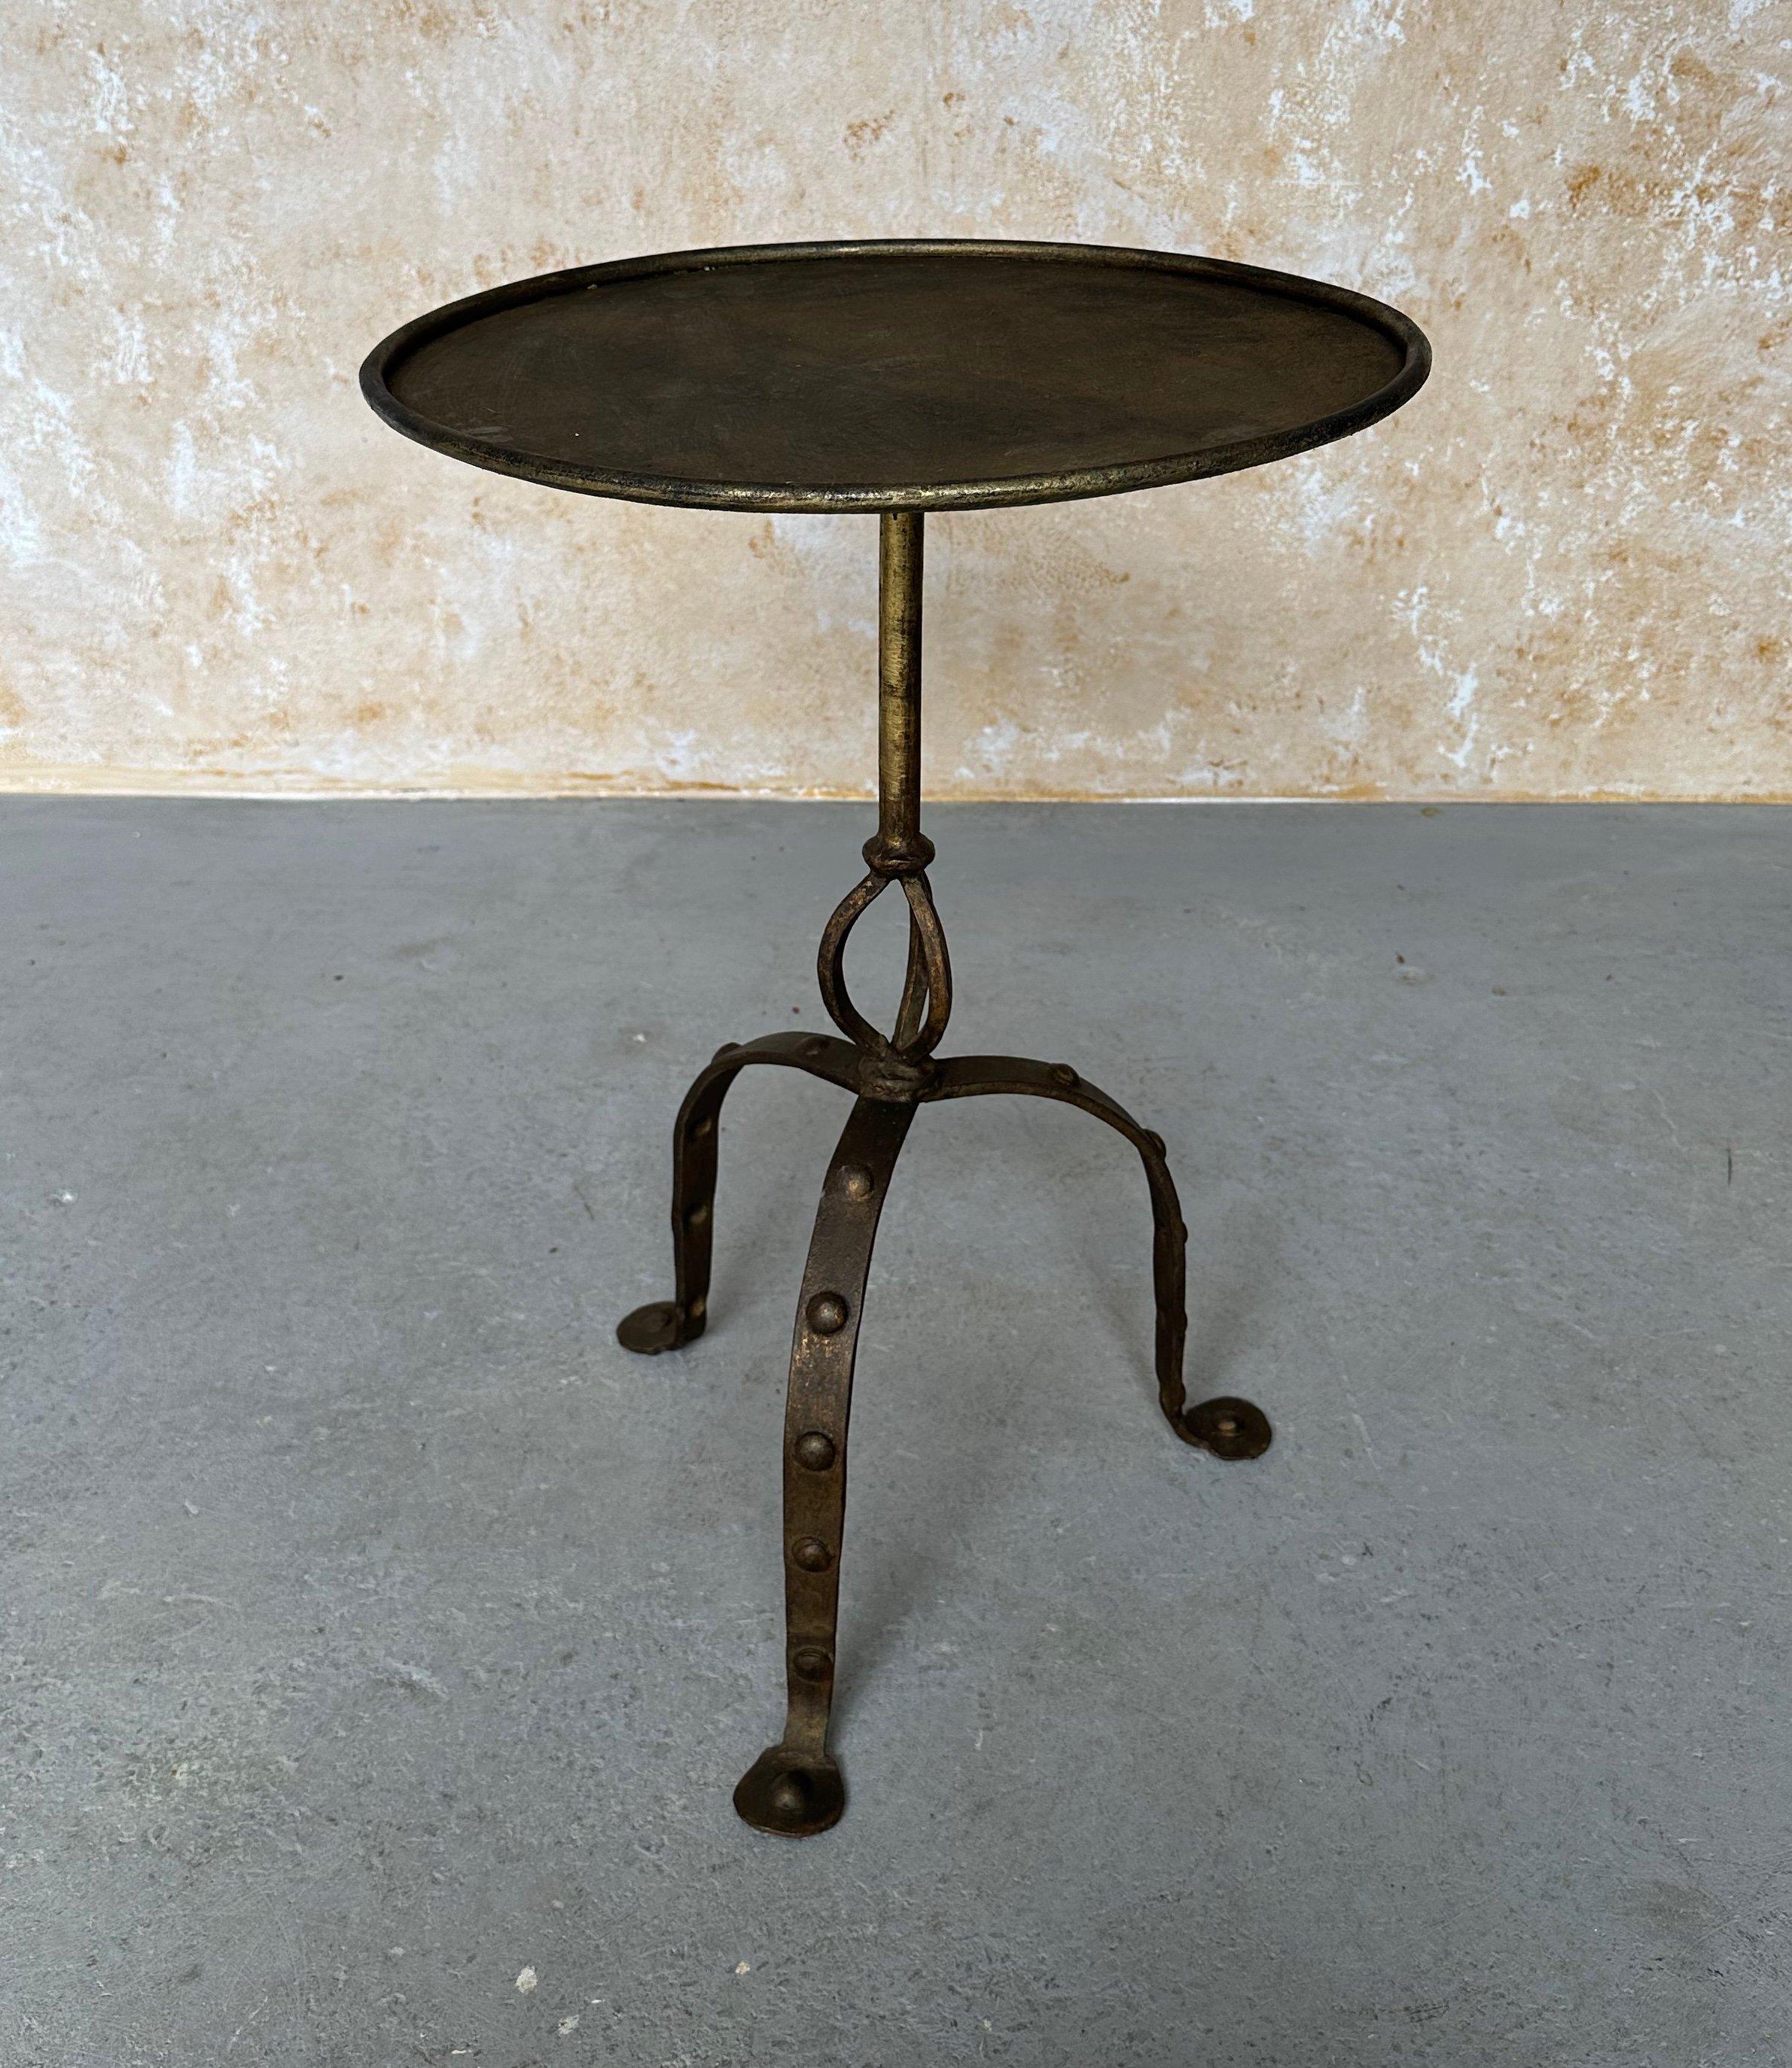 This large Spanish iron side table from the 1950s is a unique piece of vintage furniture. Measuring 26 inches in height and 18 inches in diameter, the table has a circular central stem with decorative loops at the base supported by an ornate tripod